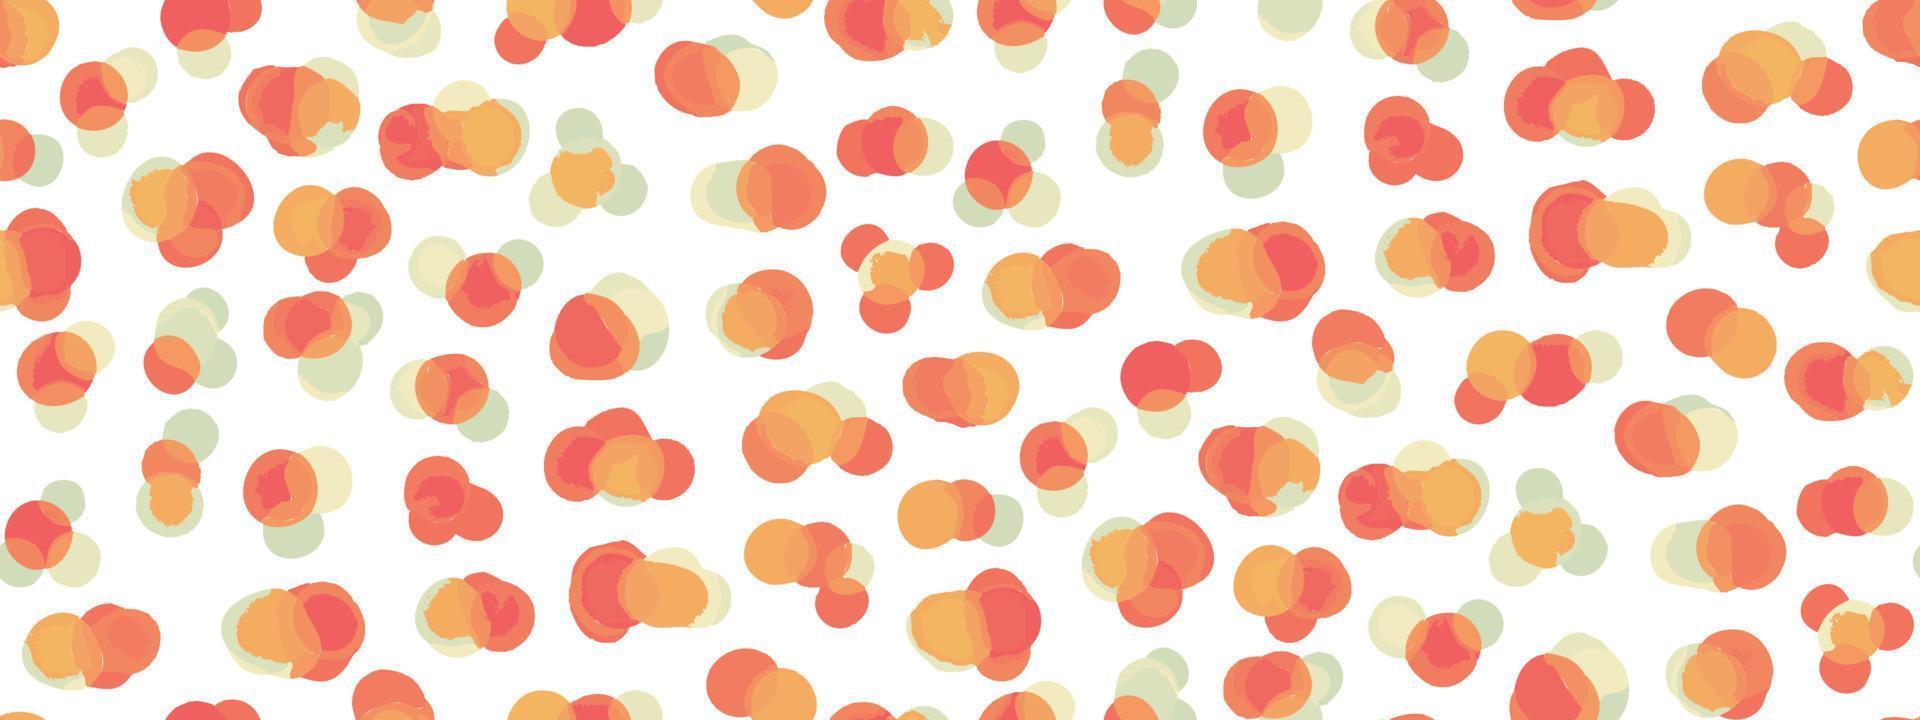 Polka dots Blue Red Soft Fun and playful design Vector Watercolor Rounds Pattern and Ink Doodle, set a Grunge Circles Background, Kids Geometric Spots and Pastel Seamless Watercolor Rounds Pattern